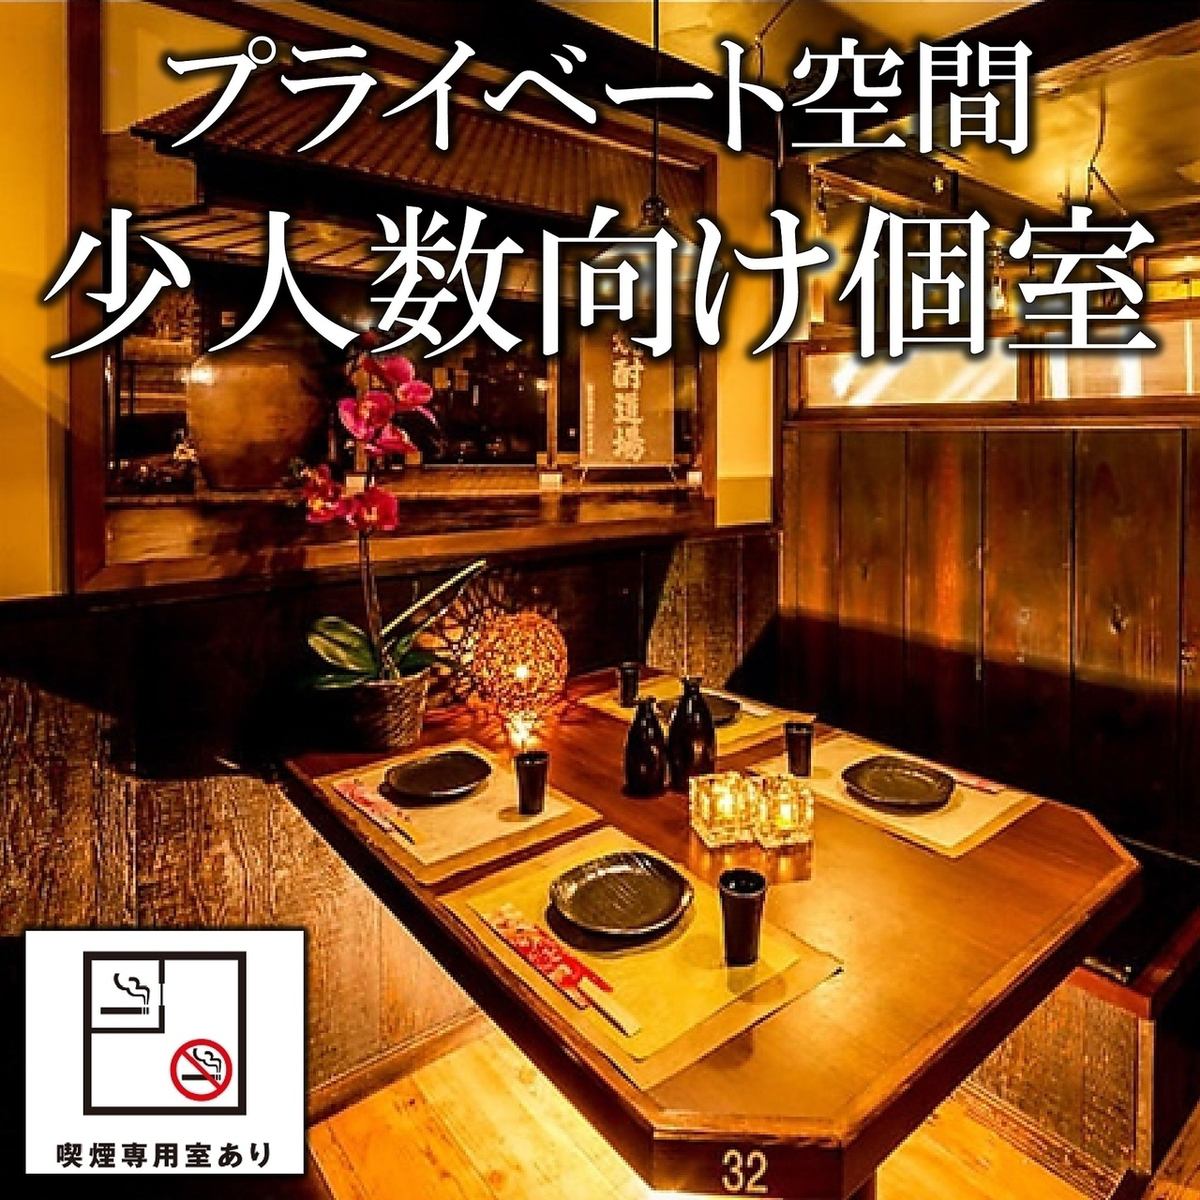 We have many private rooms that can be used by small groups ♪ Recommended for entertaining, dates, etc. ♪